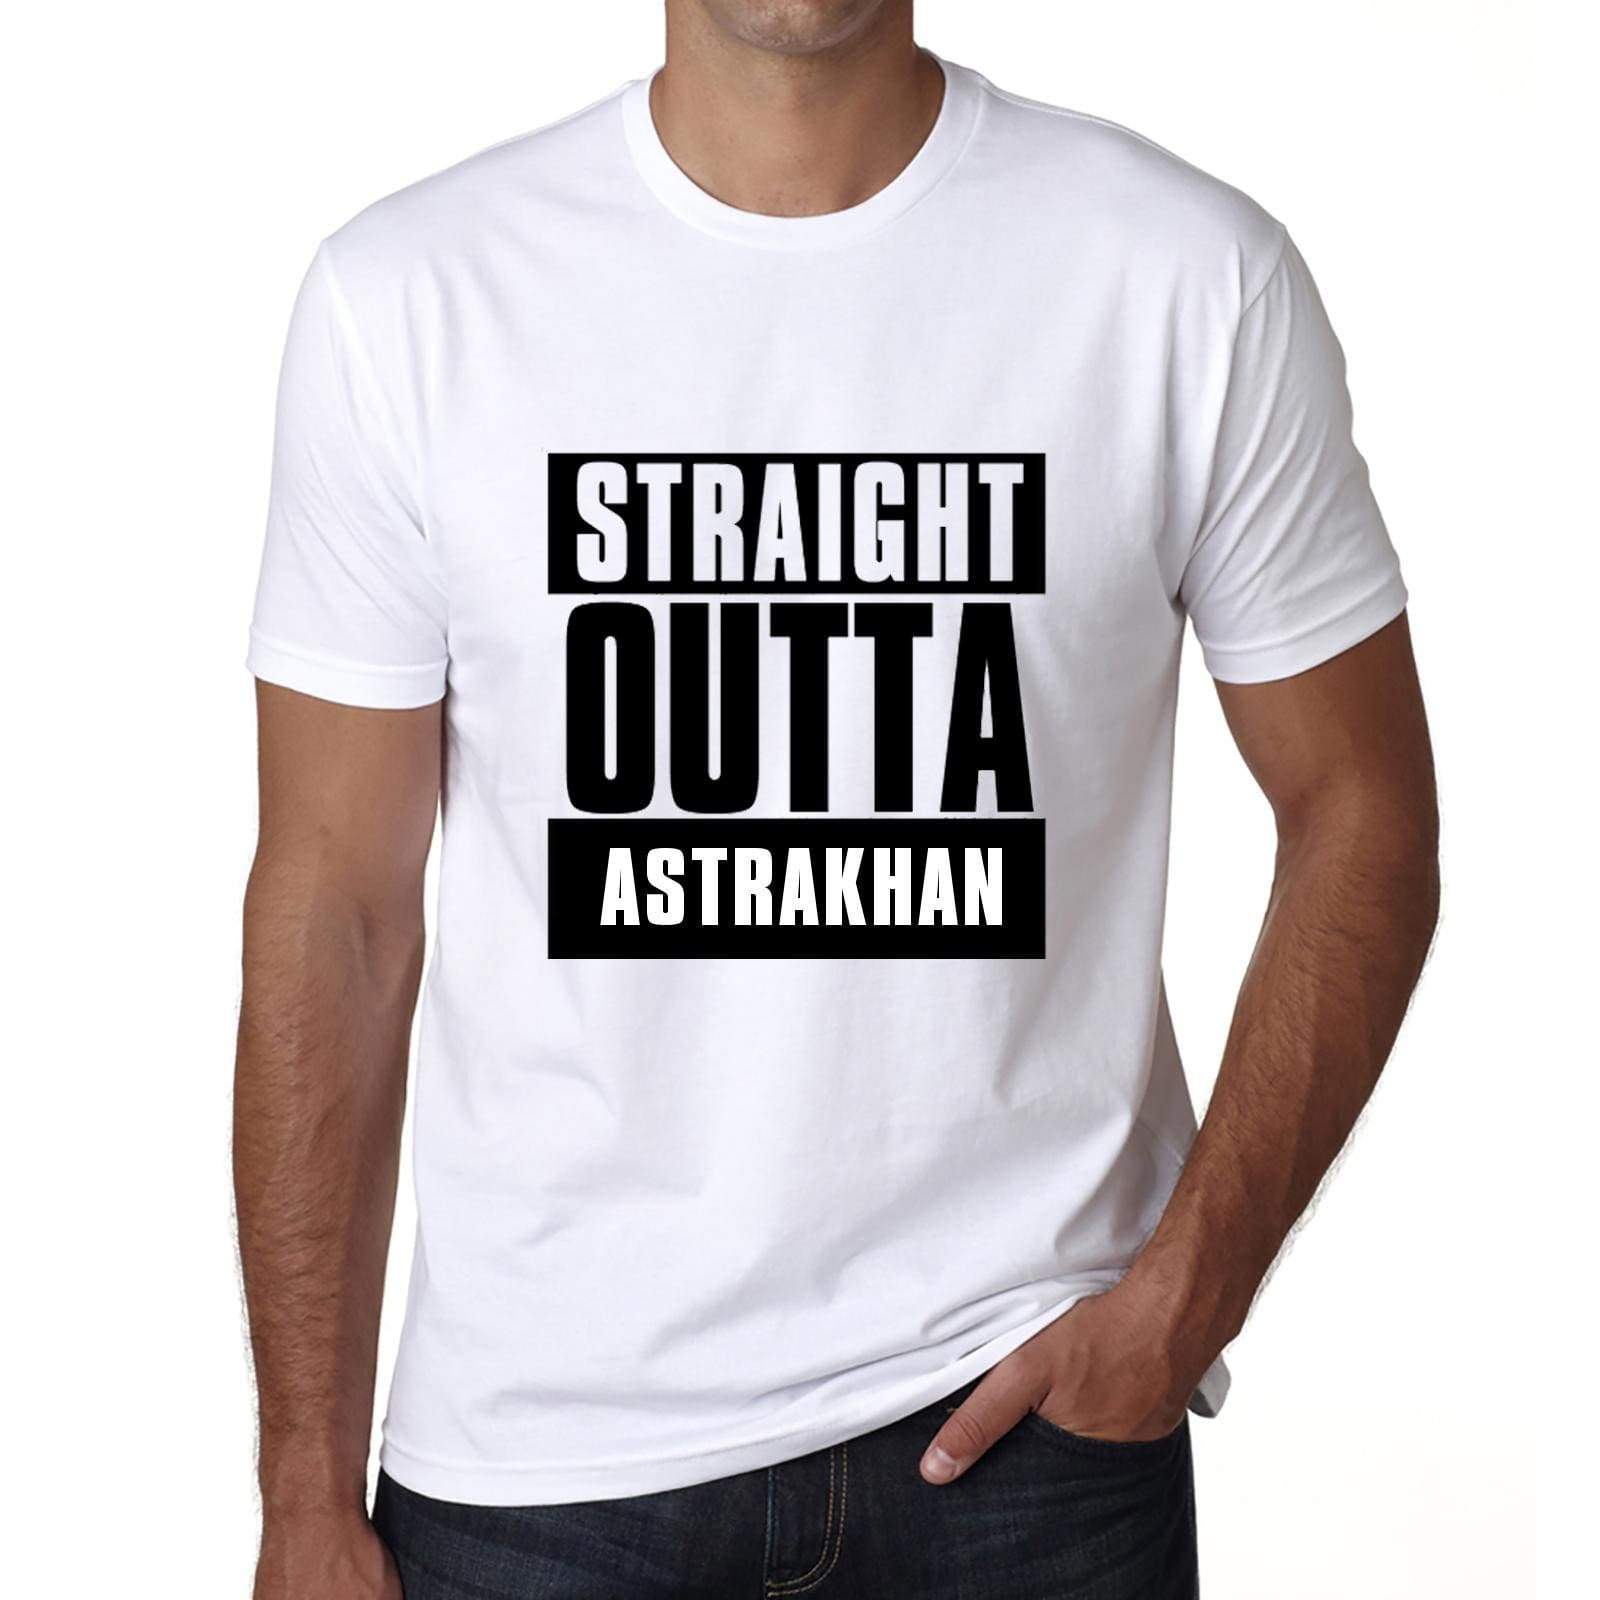 Straight Outta Astrakhan Mens Short Sleeve Round Neck T-Shirt 00027 - White / S - Casual